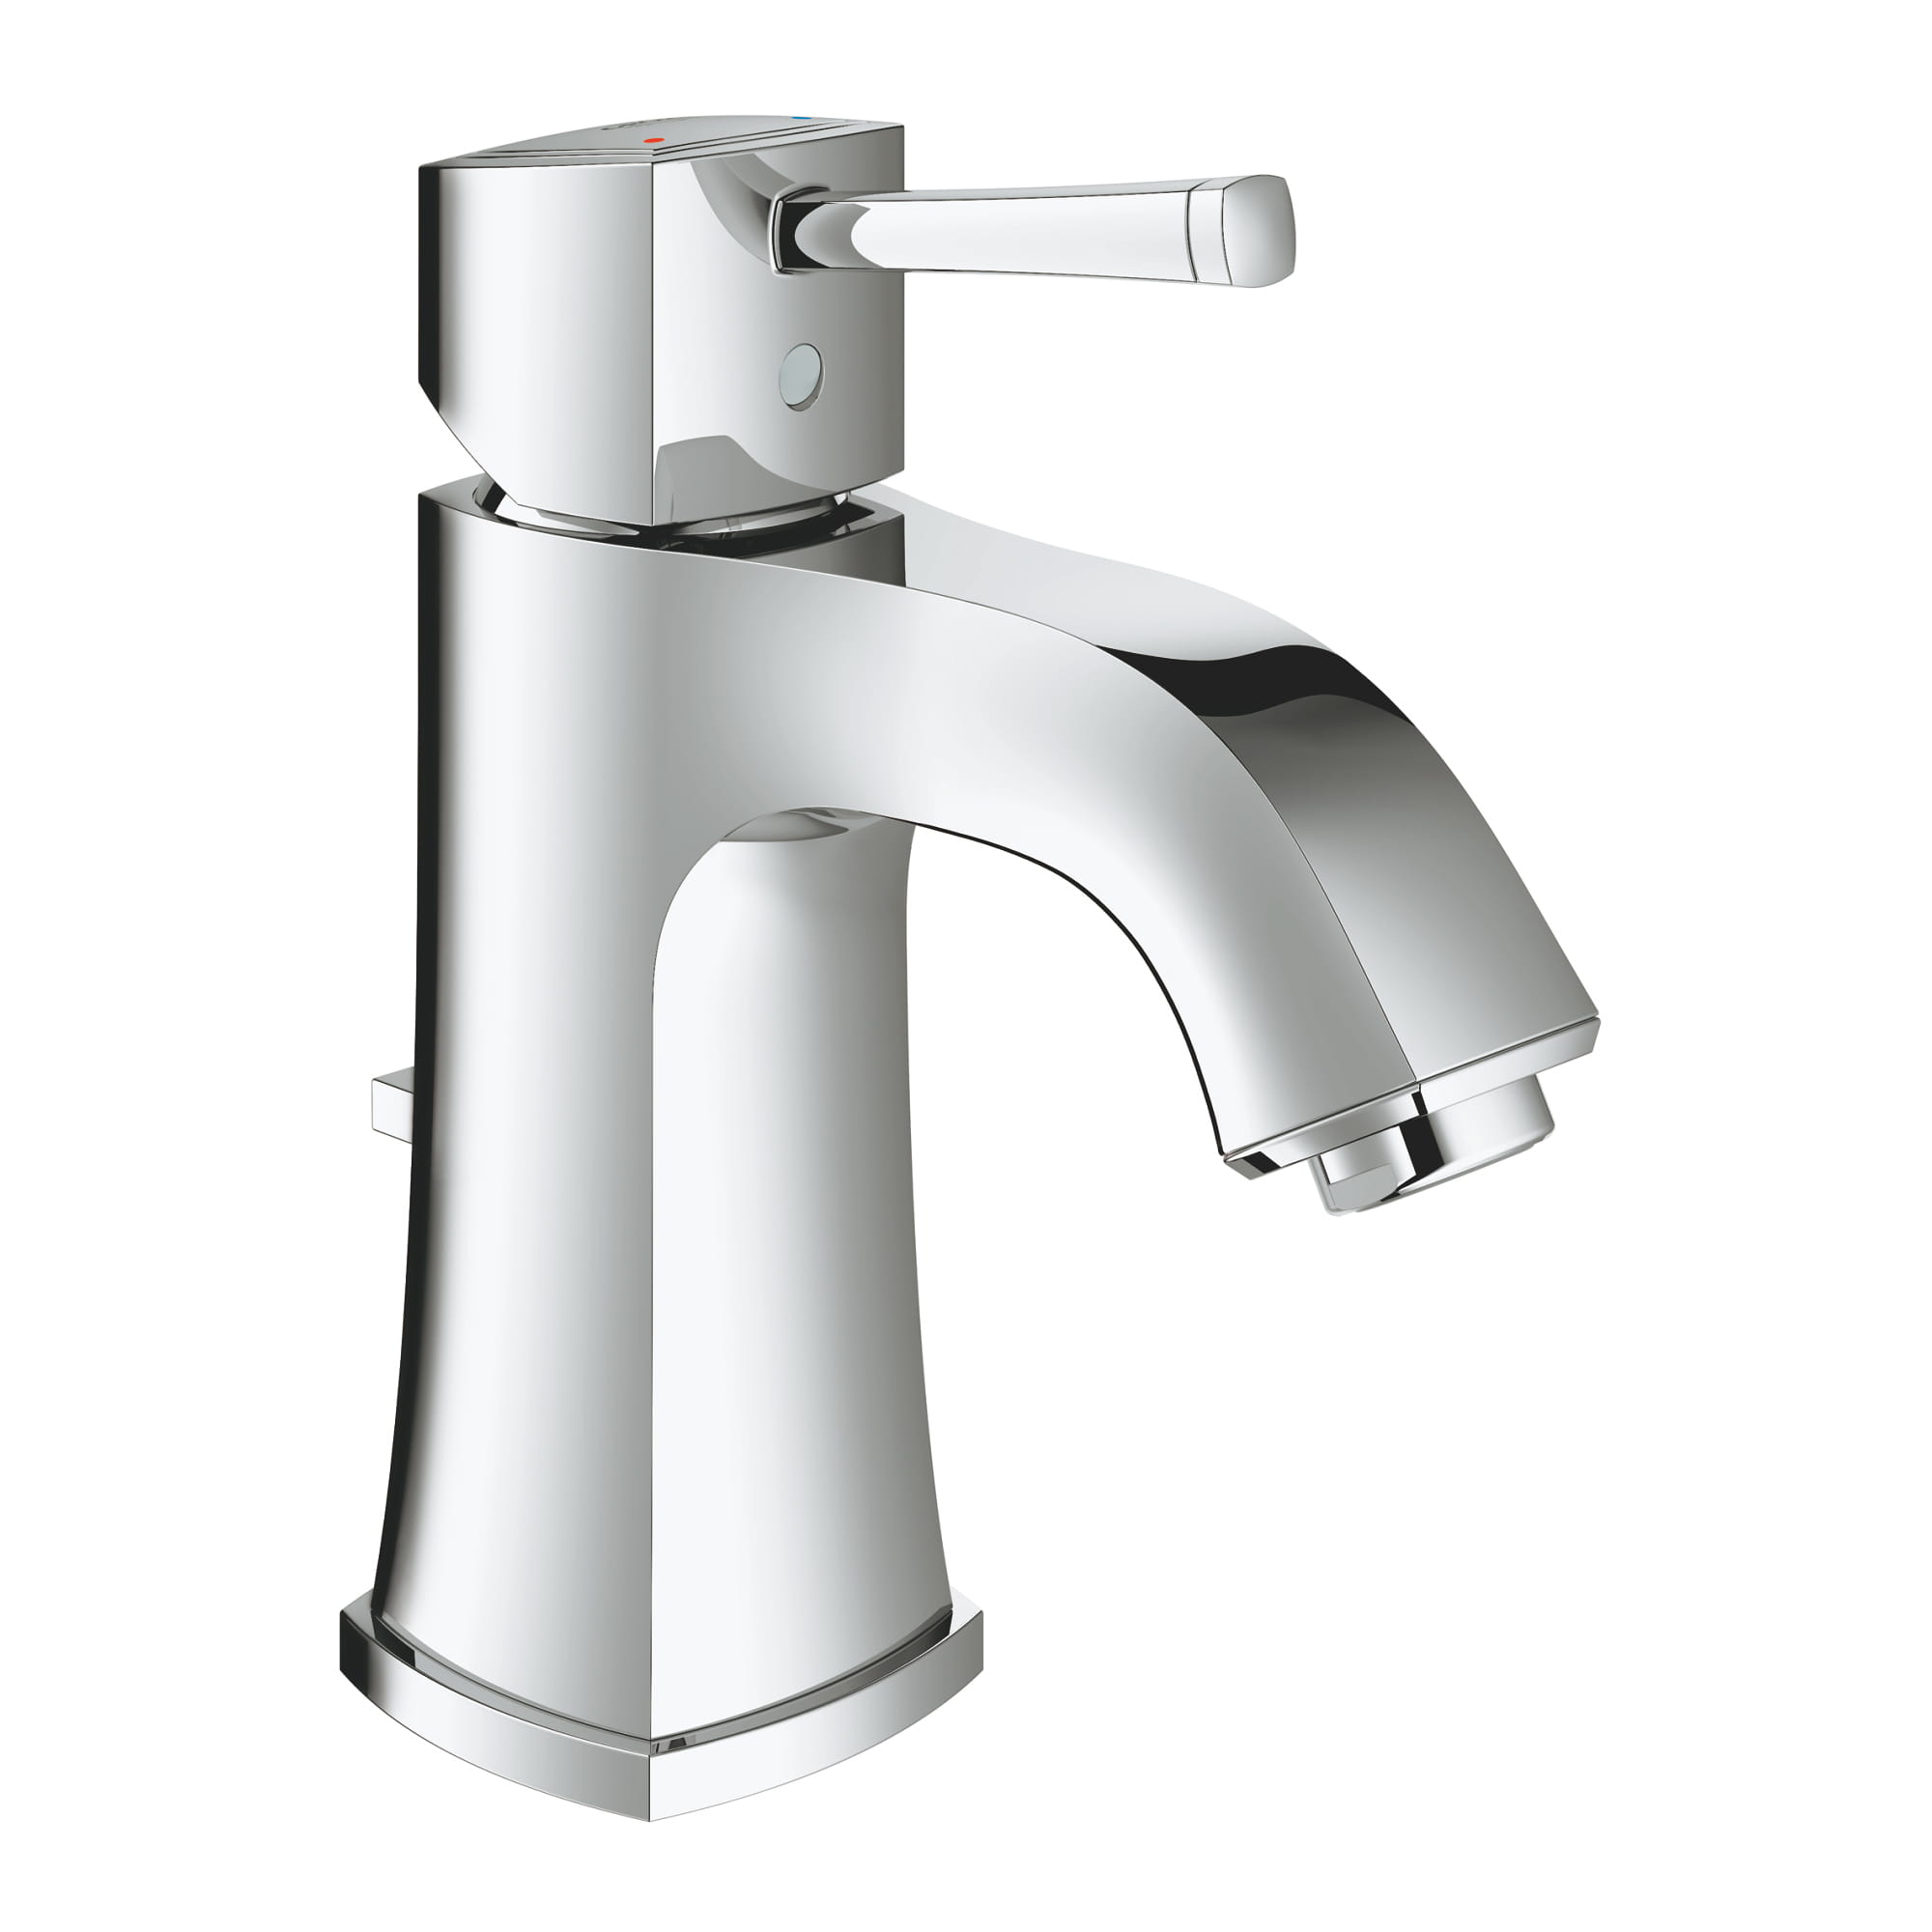 SINGLE HOLE SINGLE-HANDLE M-SIZE BATHROOM FAUCET 1.2 GPM-related